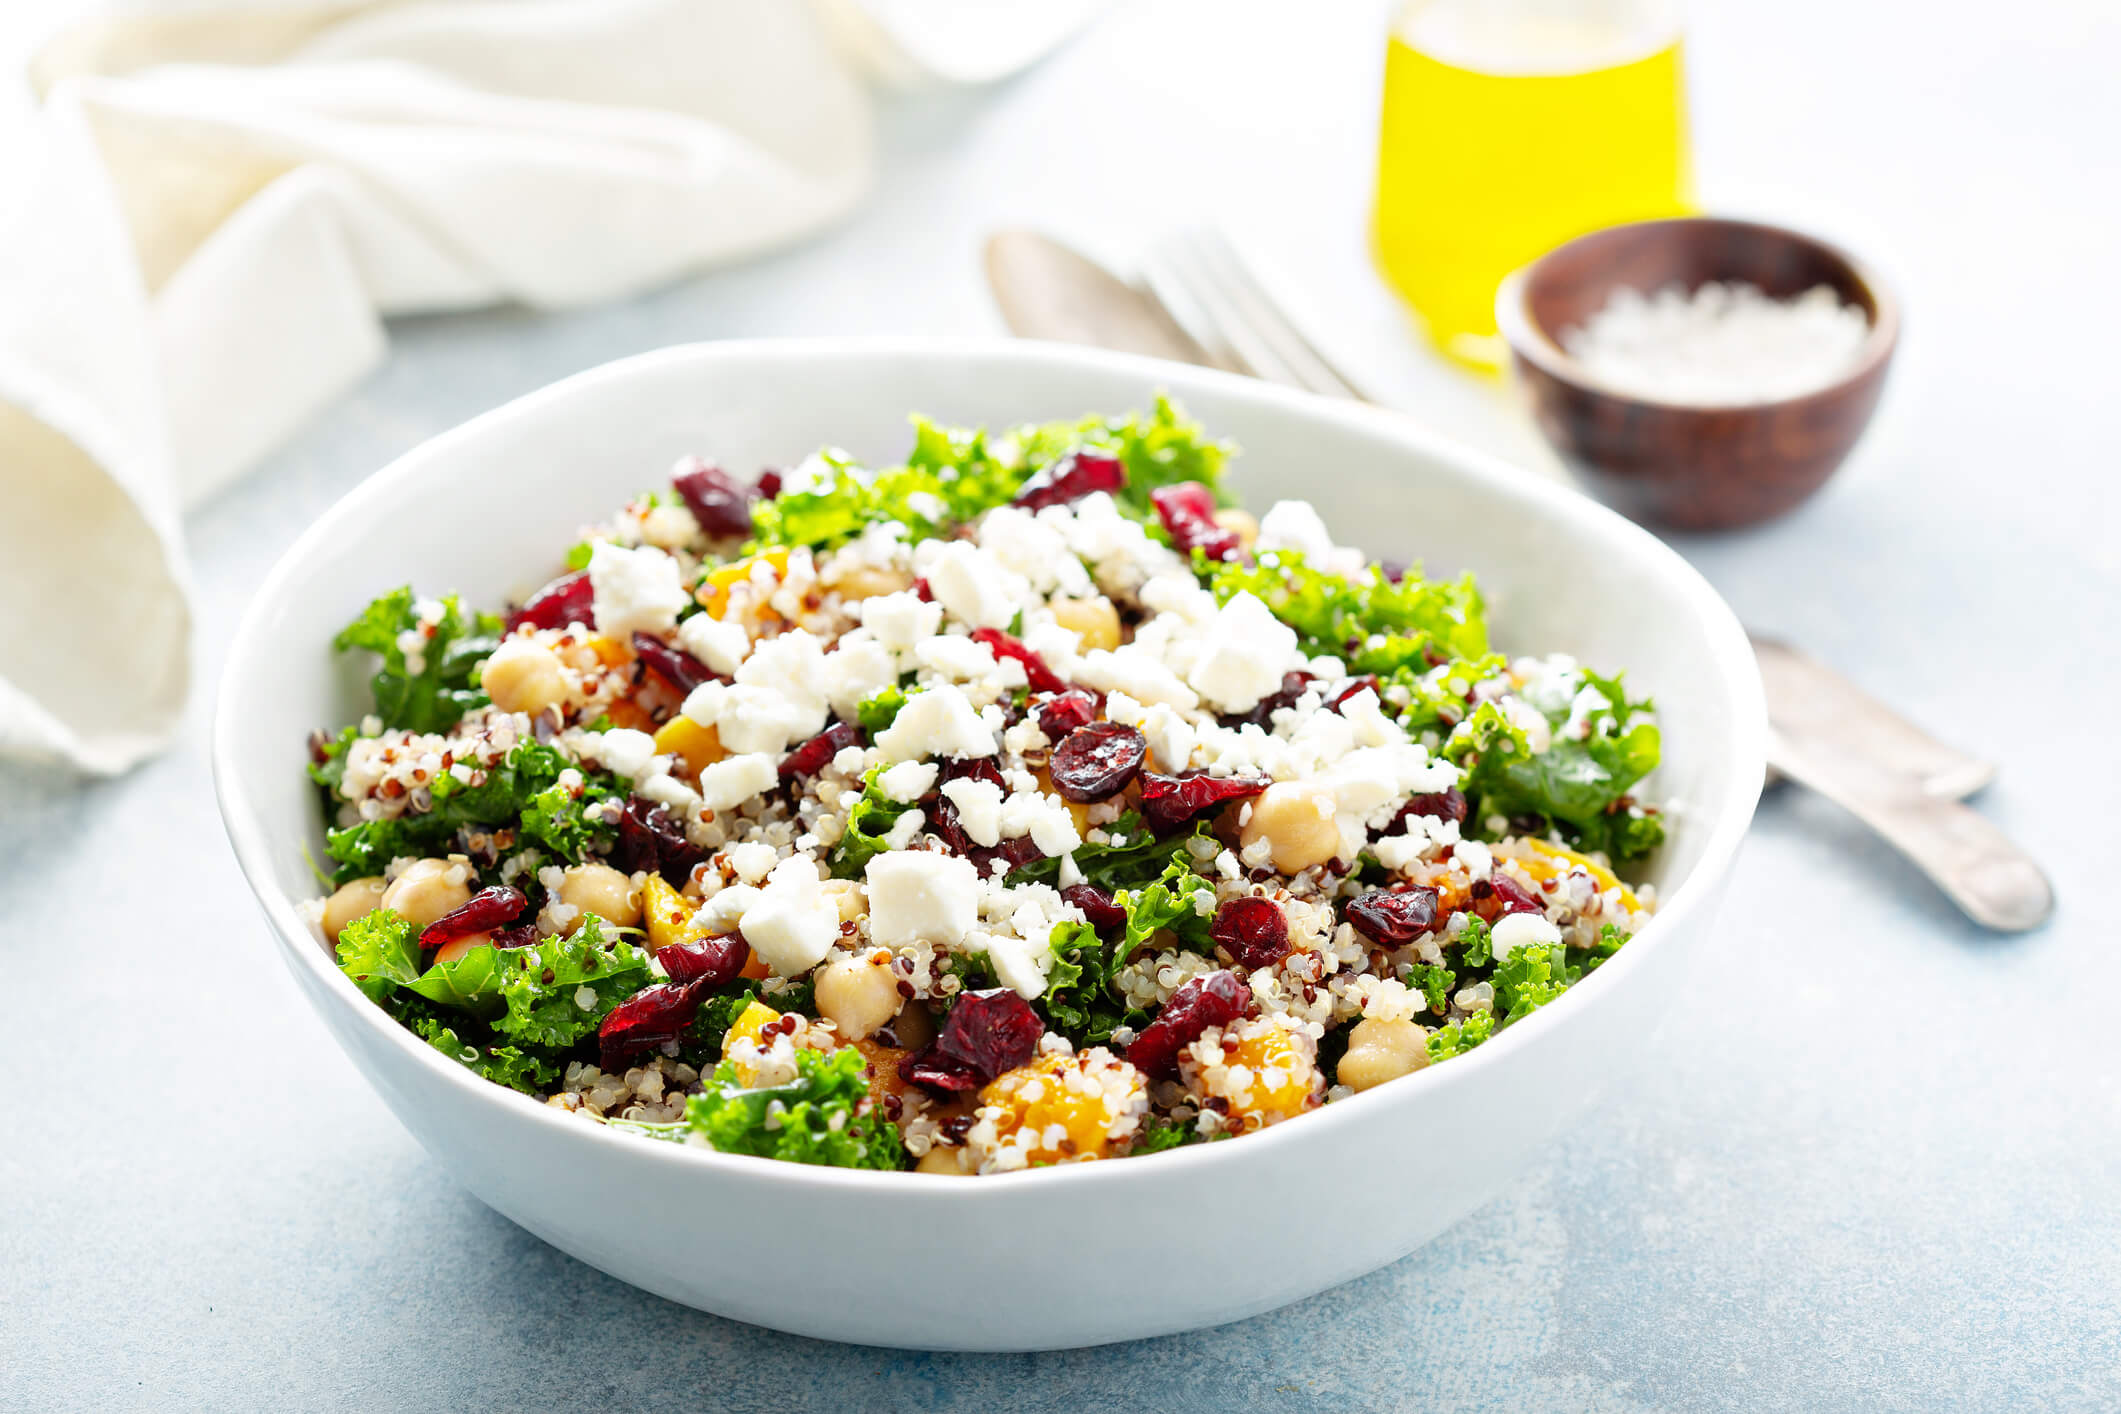 kale and quinoa salad with chickpeas